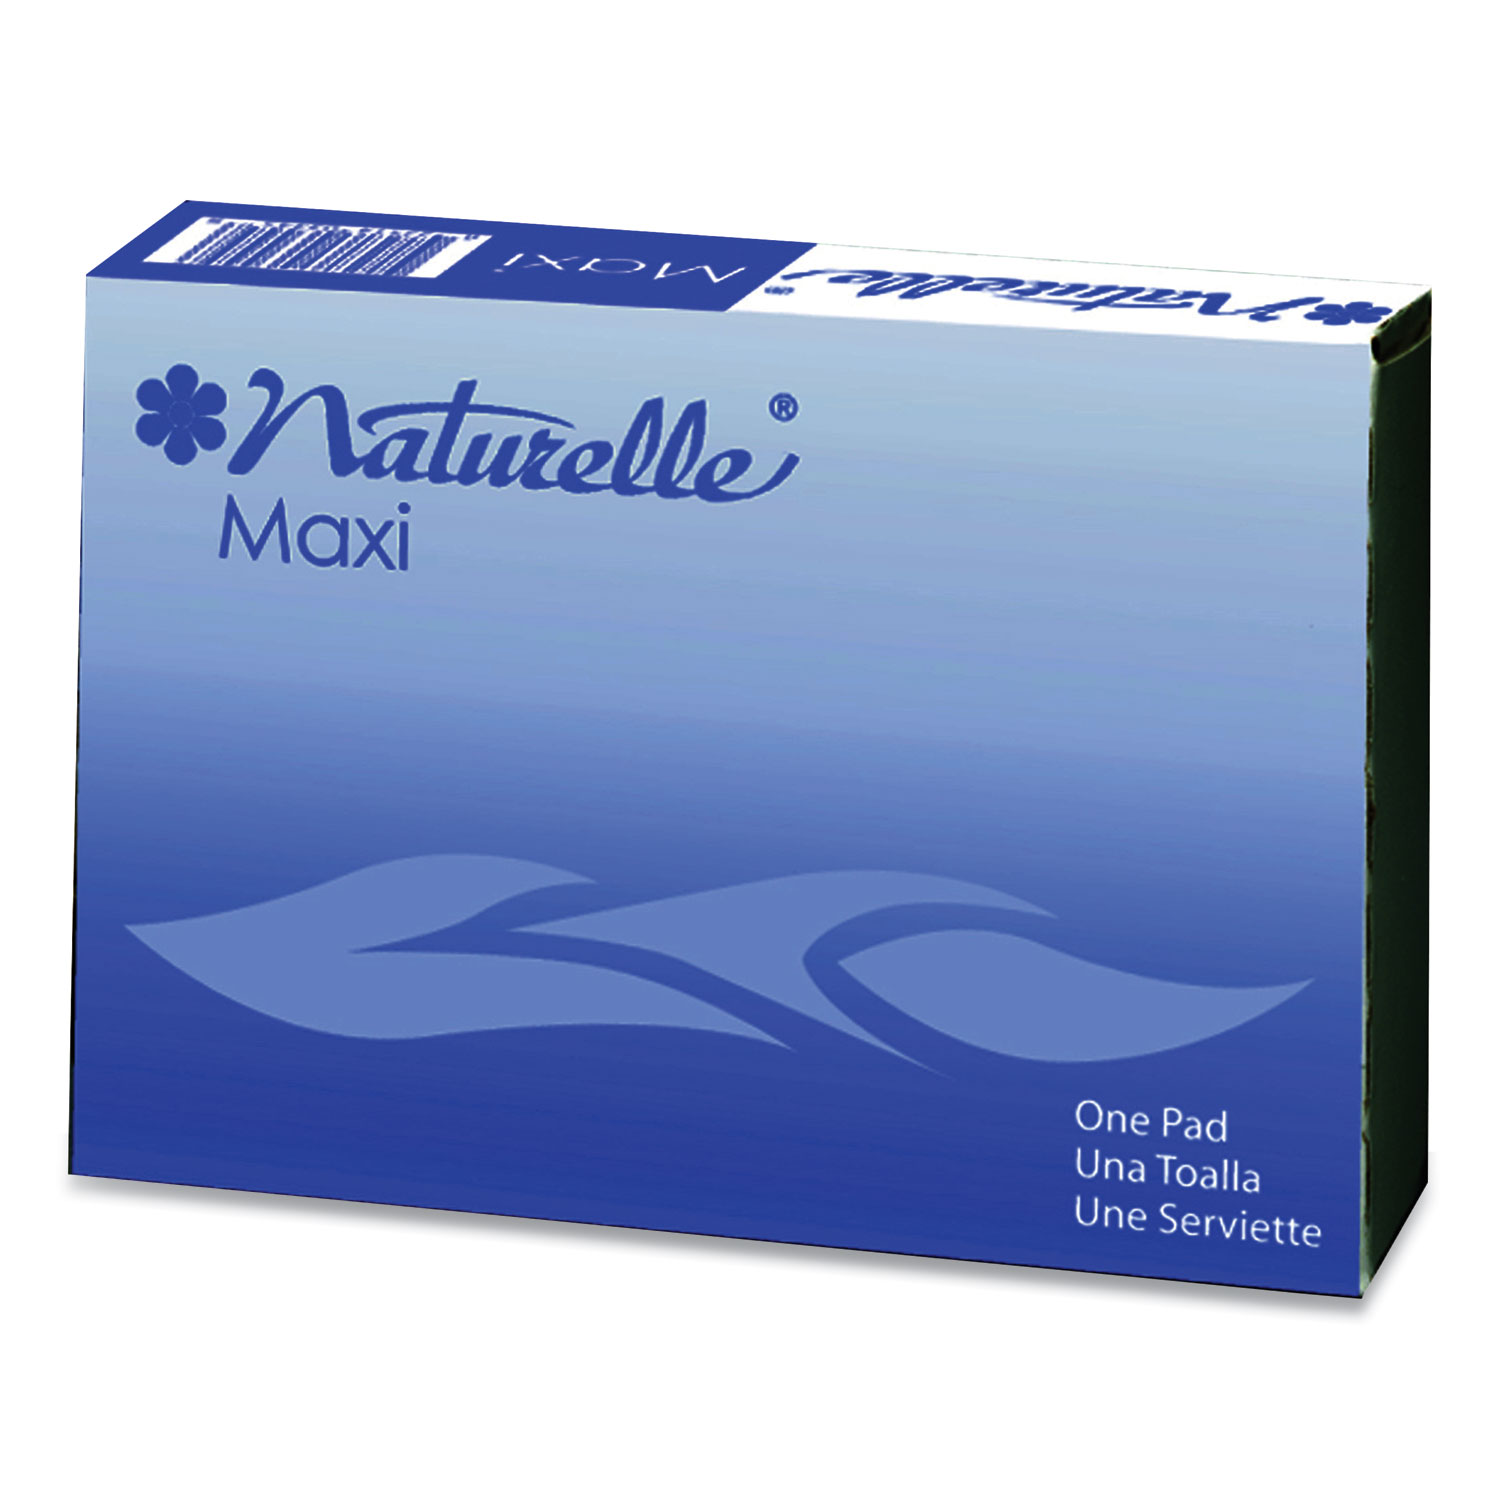  Impact 25130973 Naturelle Maxi Pads, #4 For Vending Machines, 250 Individually Wrapped/Carton (IMP25130973) 